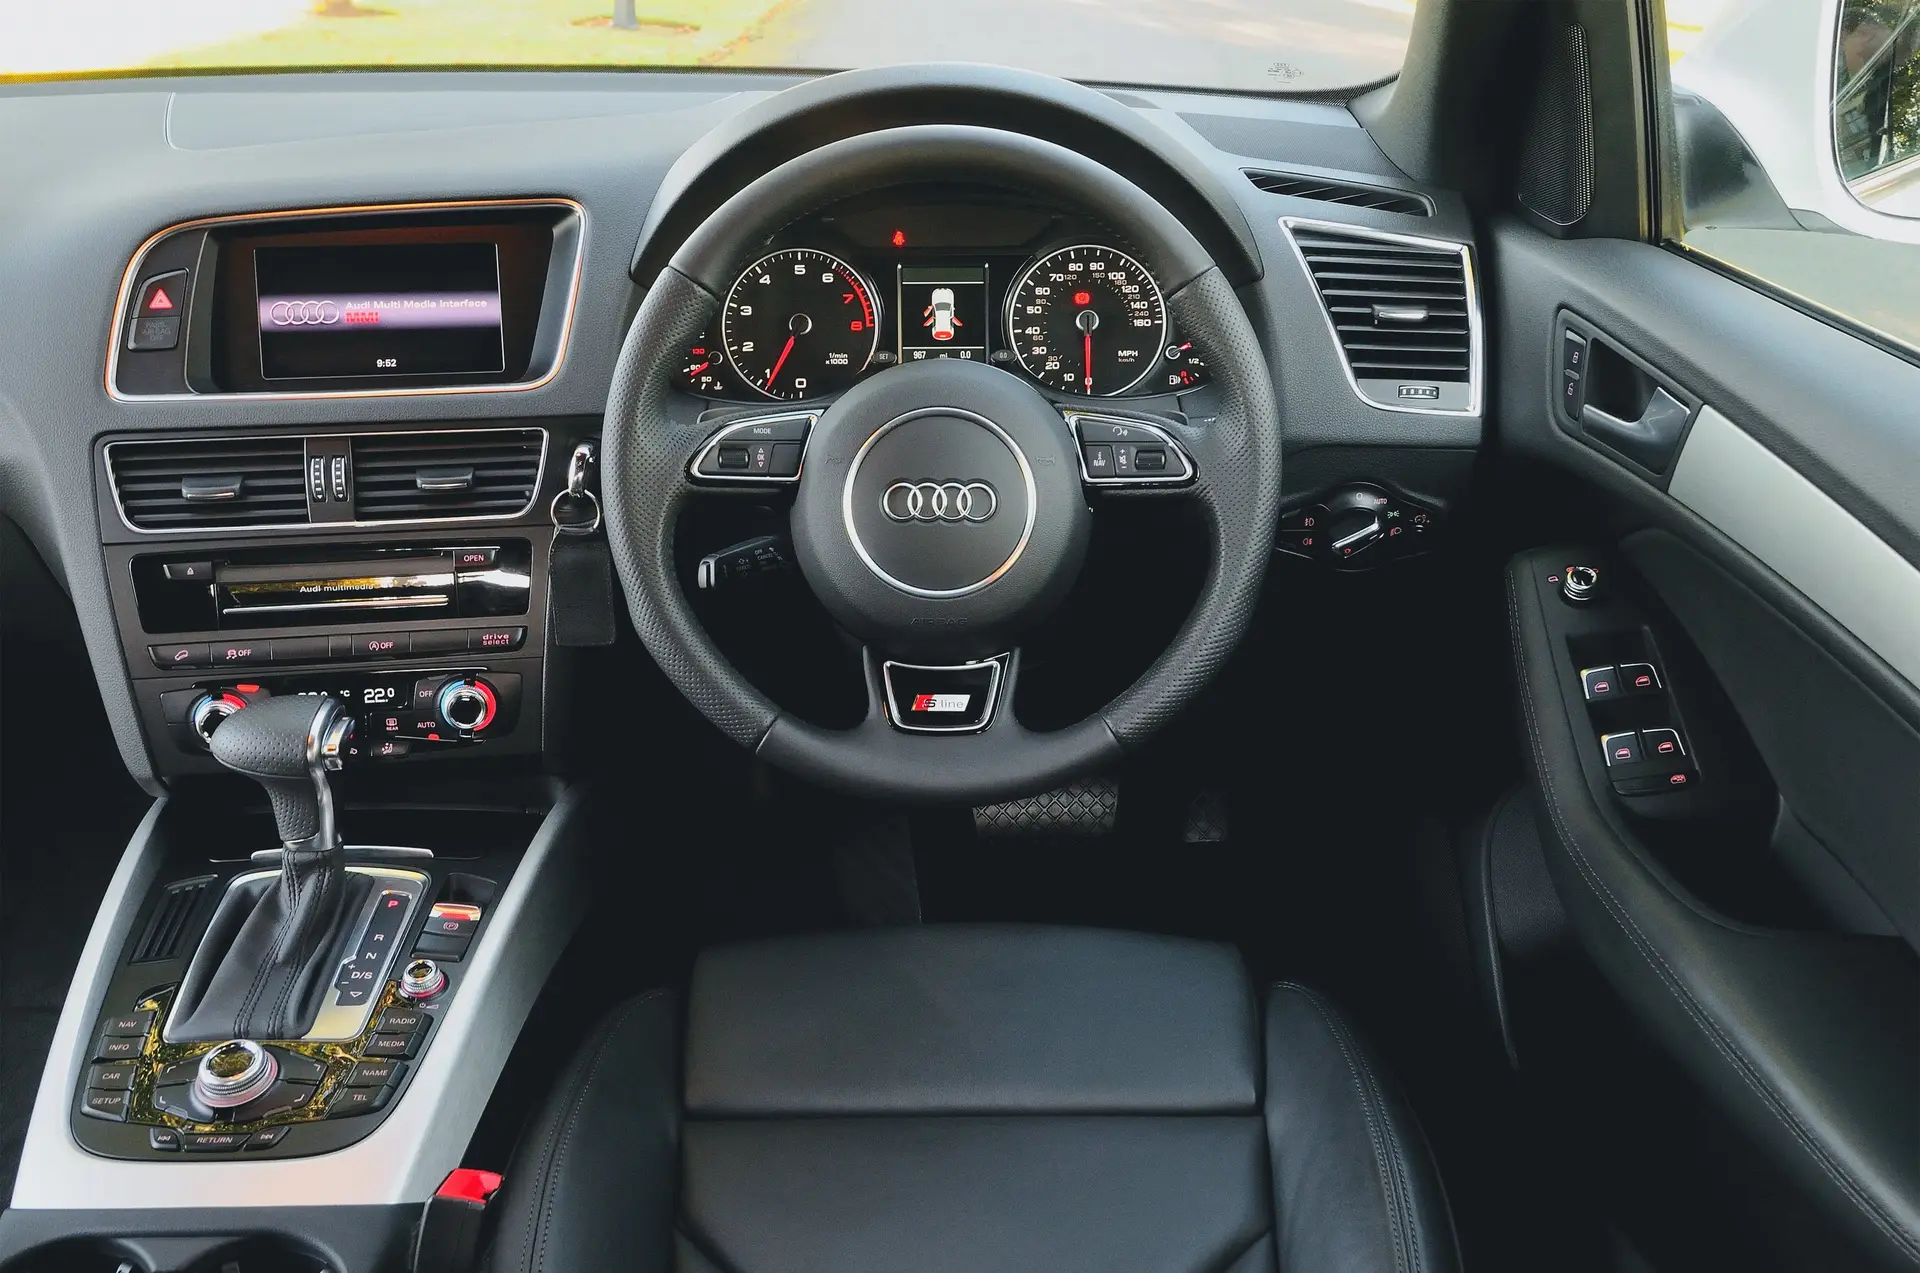 Audi Q5 (2008-2017) Review: interior close up photo of the Audi Q5 dashboard